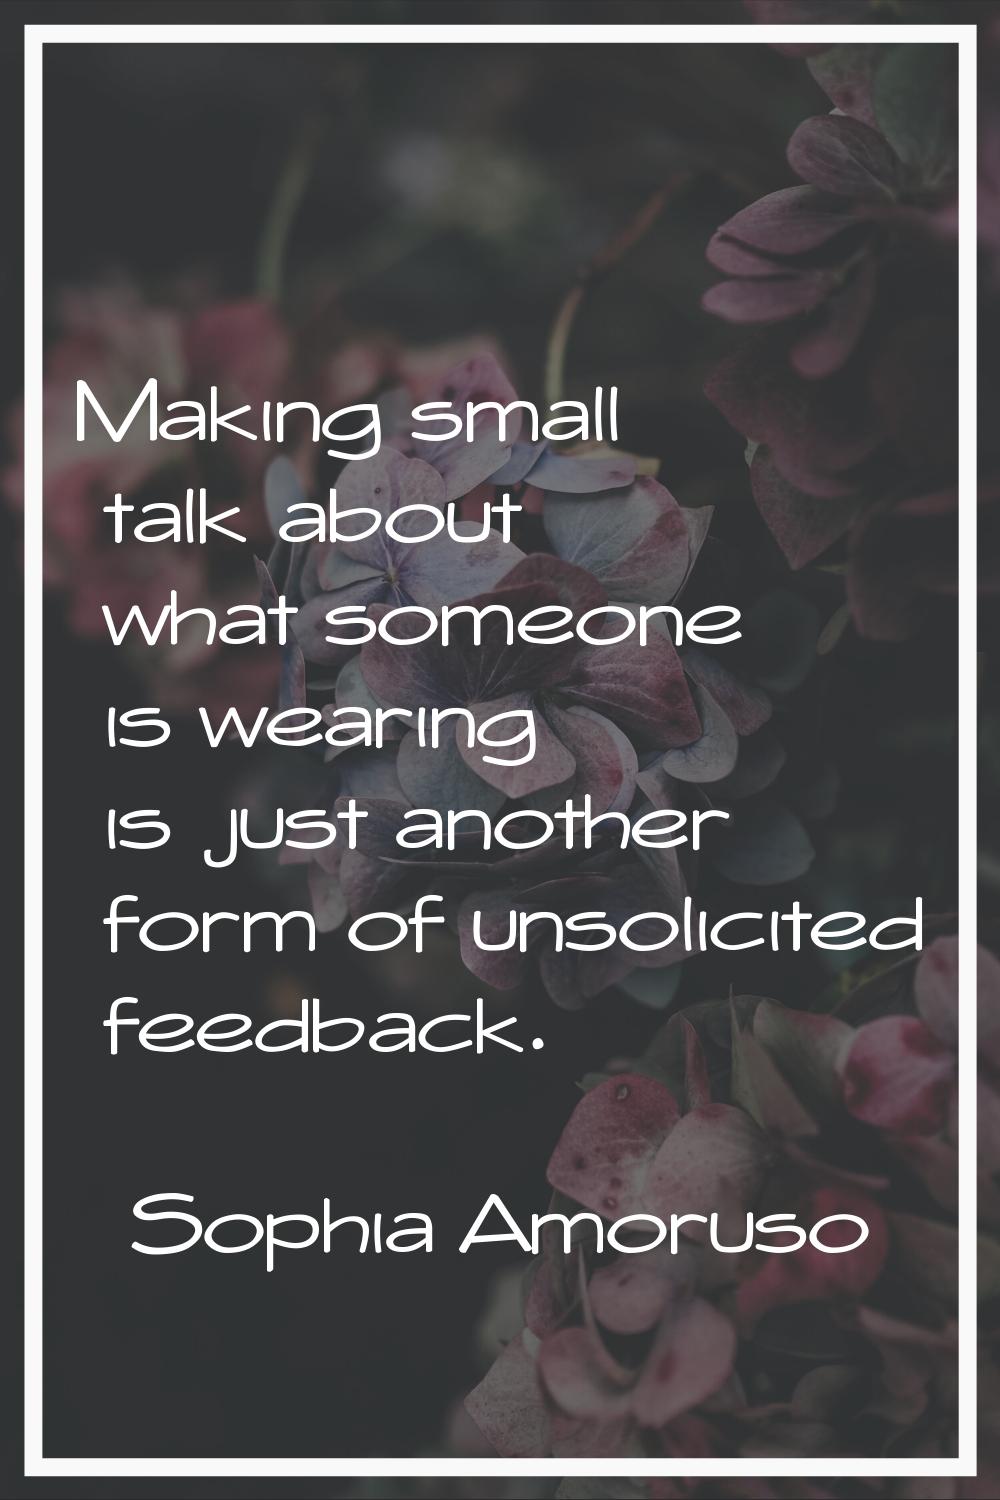 Making small talk about what someone is wearing is just another form of unsolicited feedback.